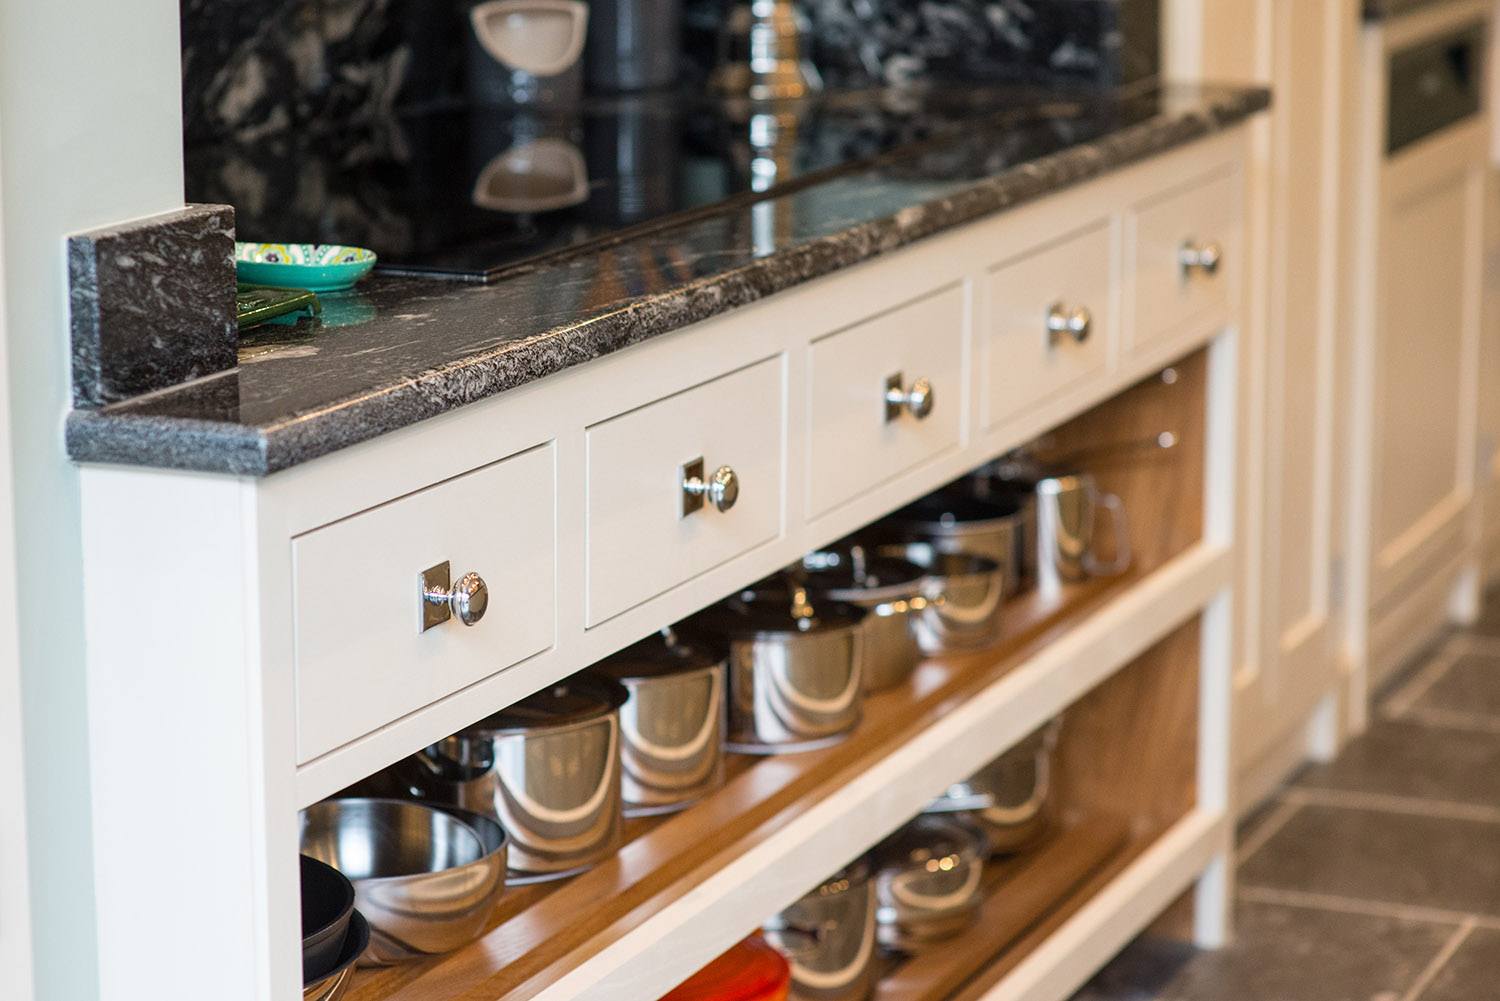 Naked Kitchens storage solutions